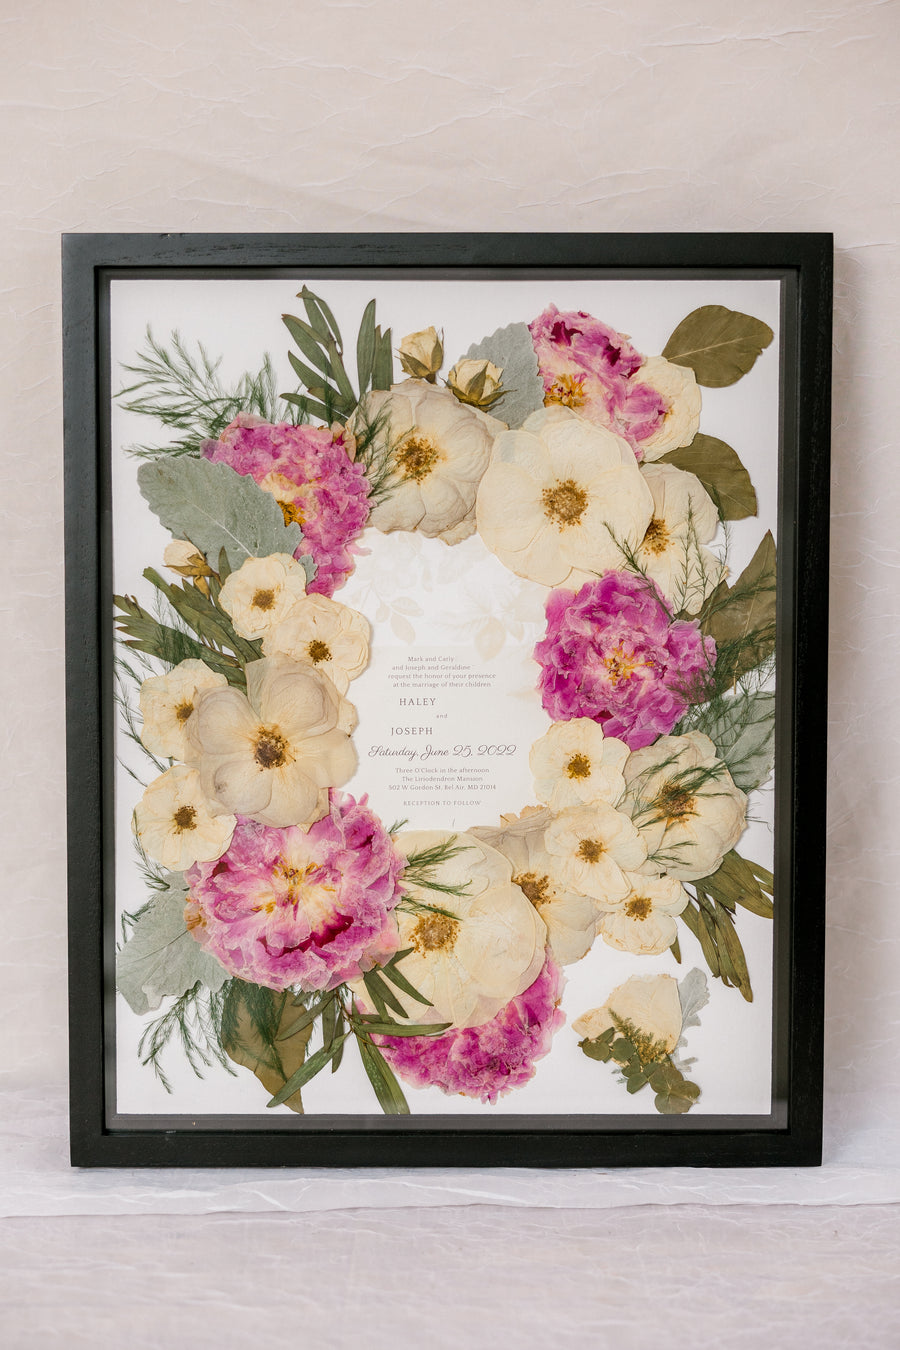 Black wood 16x20 frame with a pressed flower design with wedding invite on white background